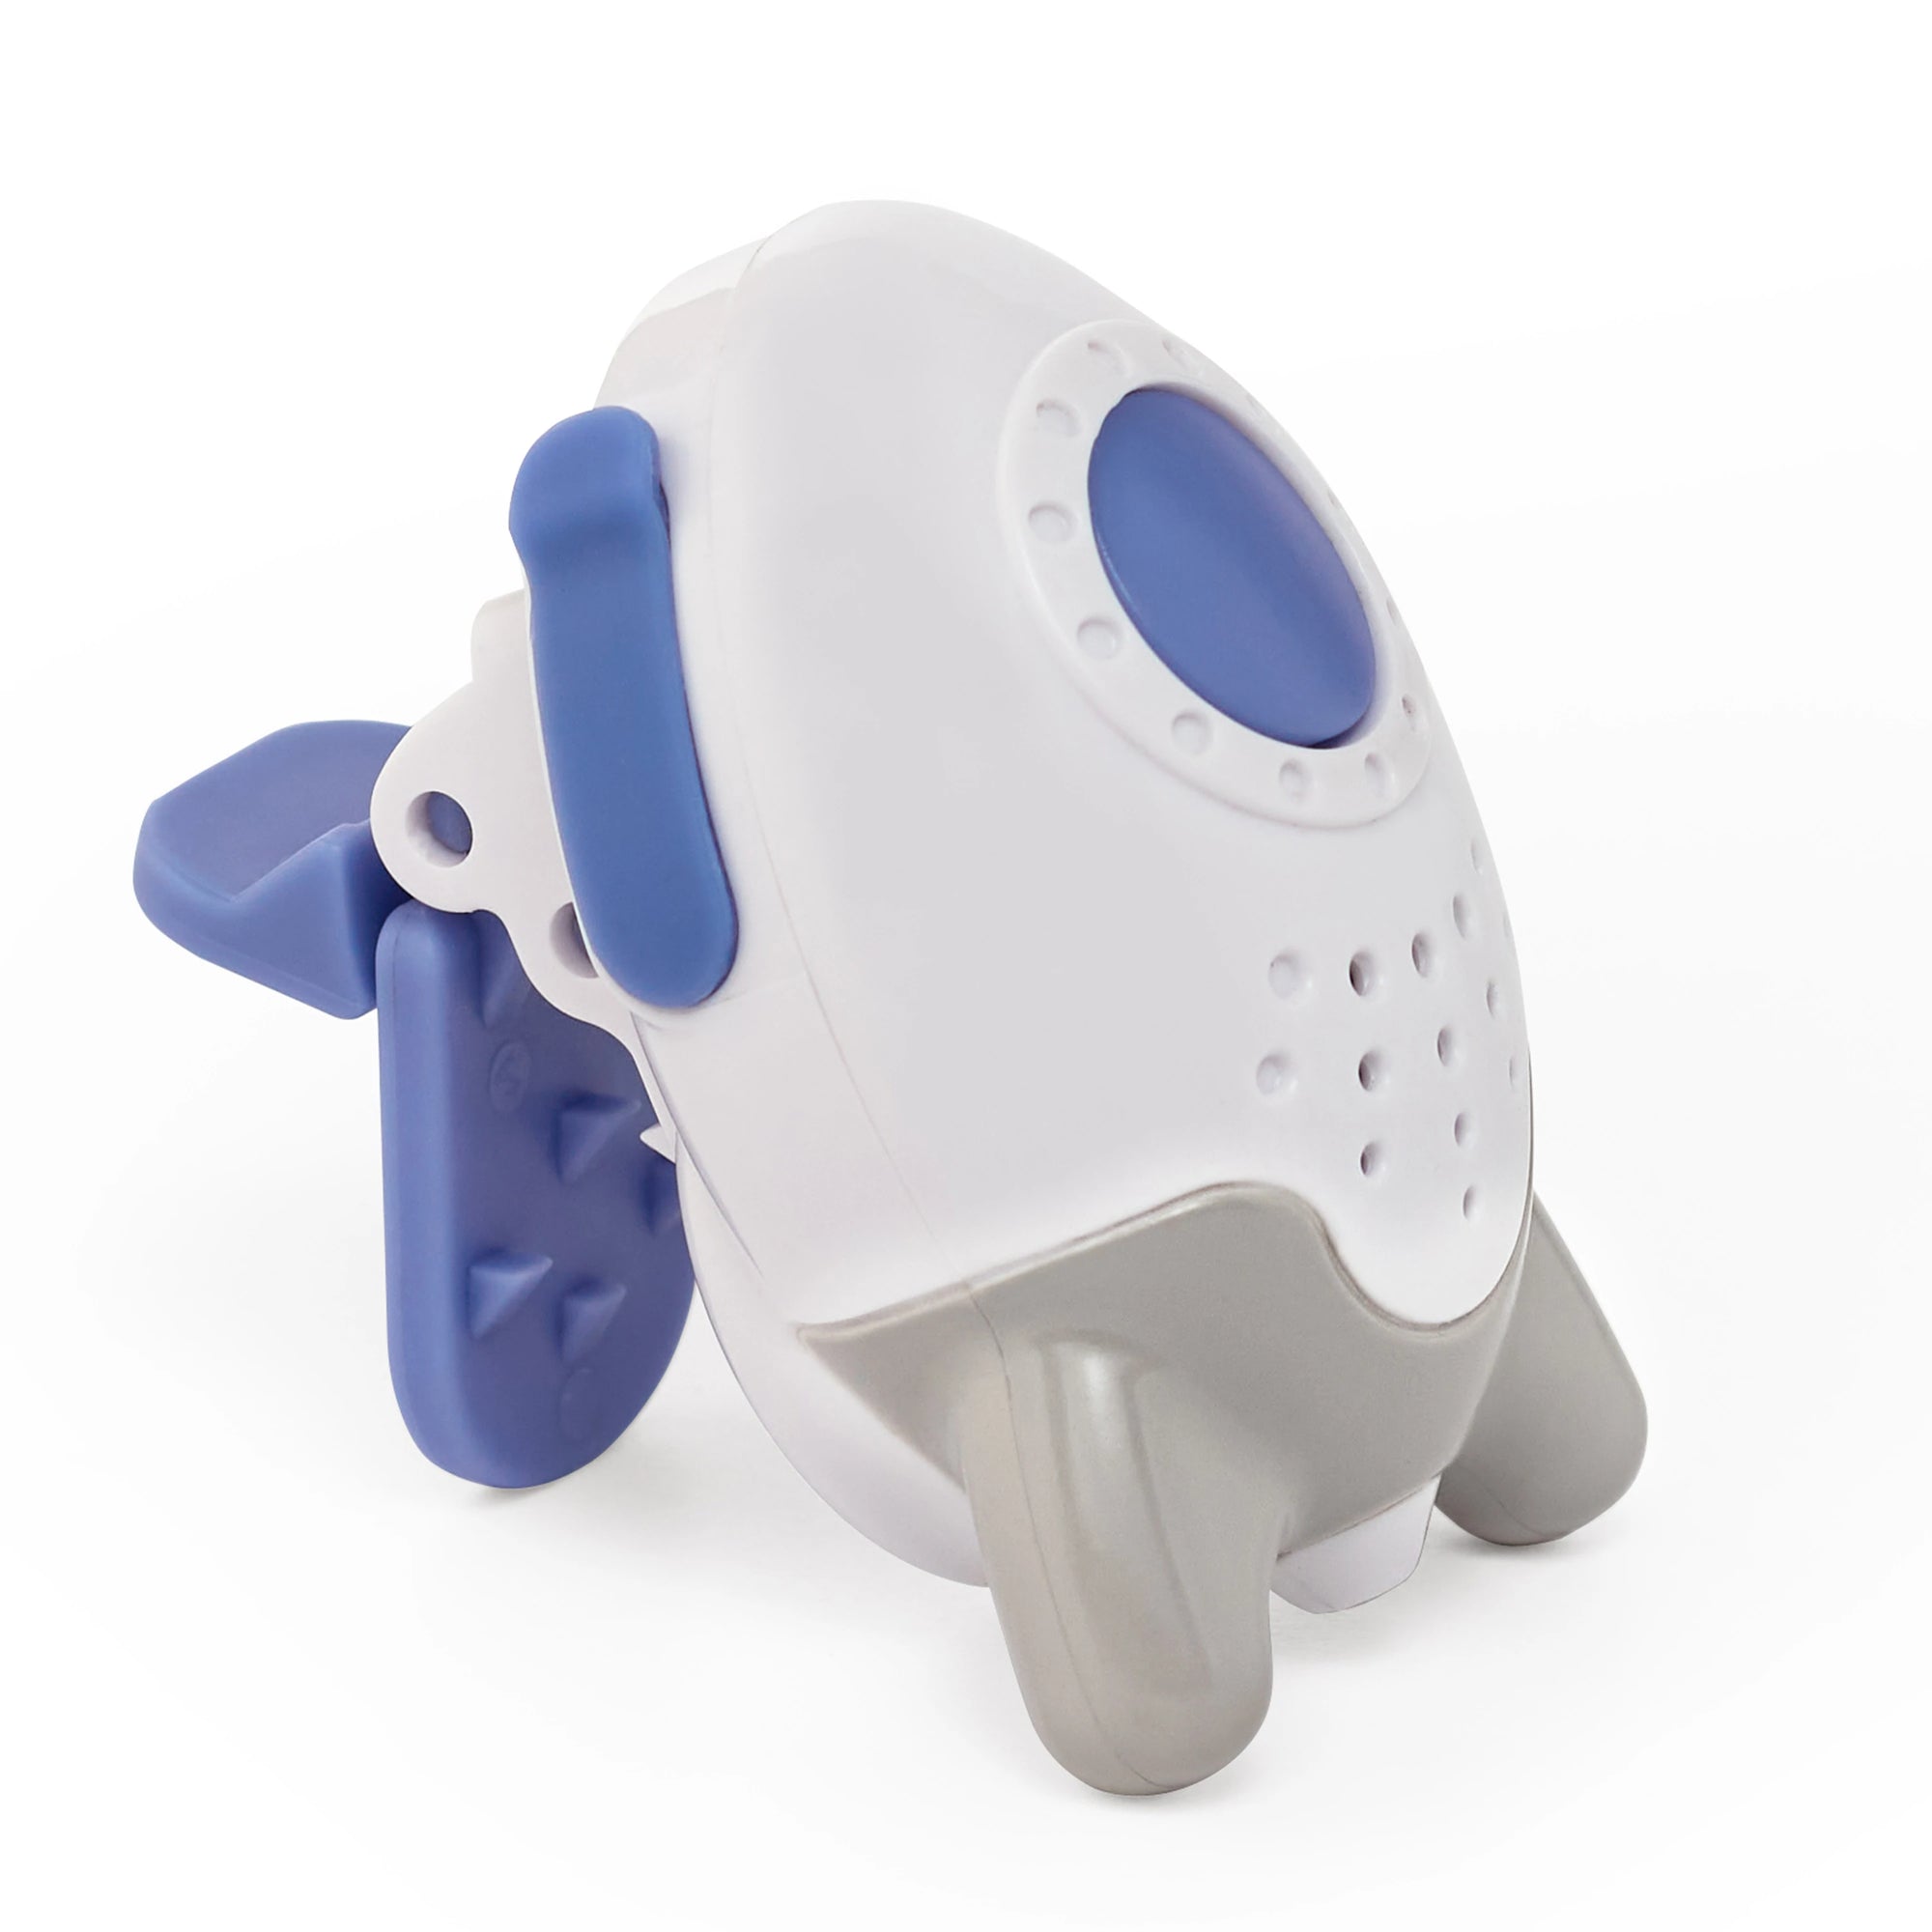 Rockit Wooshh Portable Sound Soother